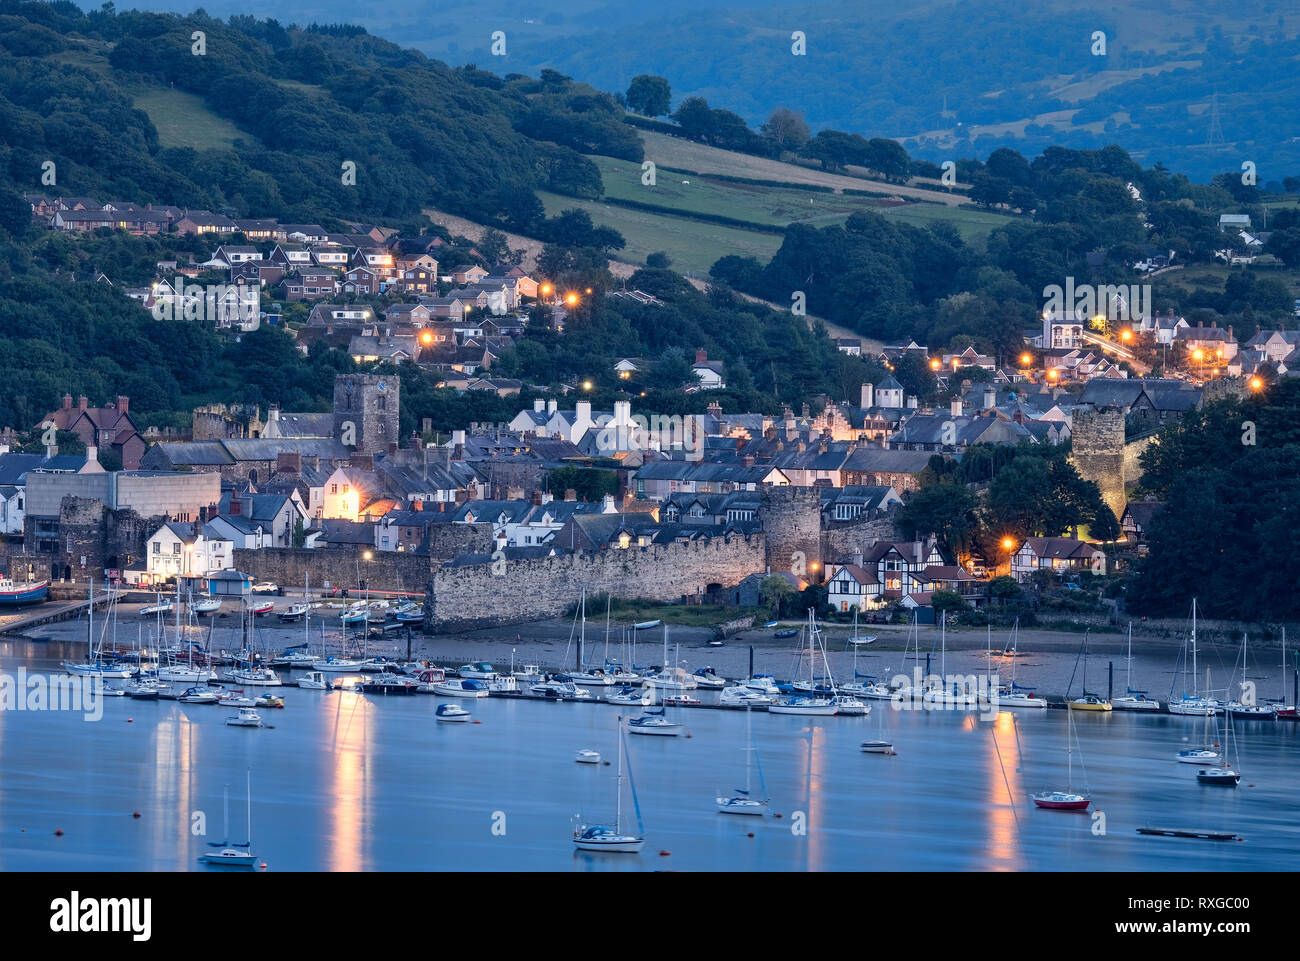 The Town of Conwy at night viewed across the Conwy Estuary, North Wales, UK Stock Photo